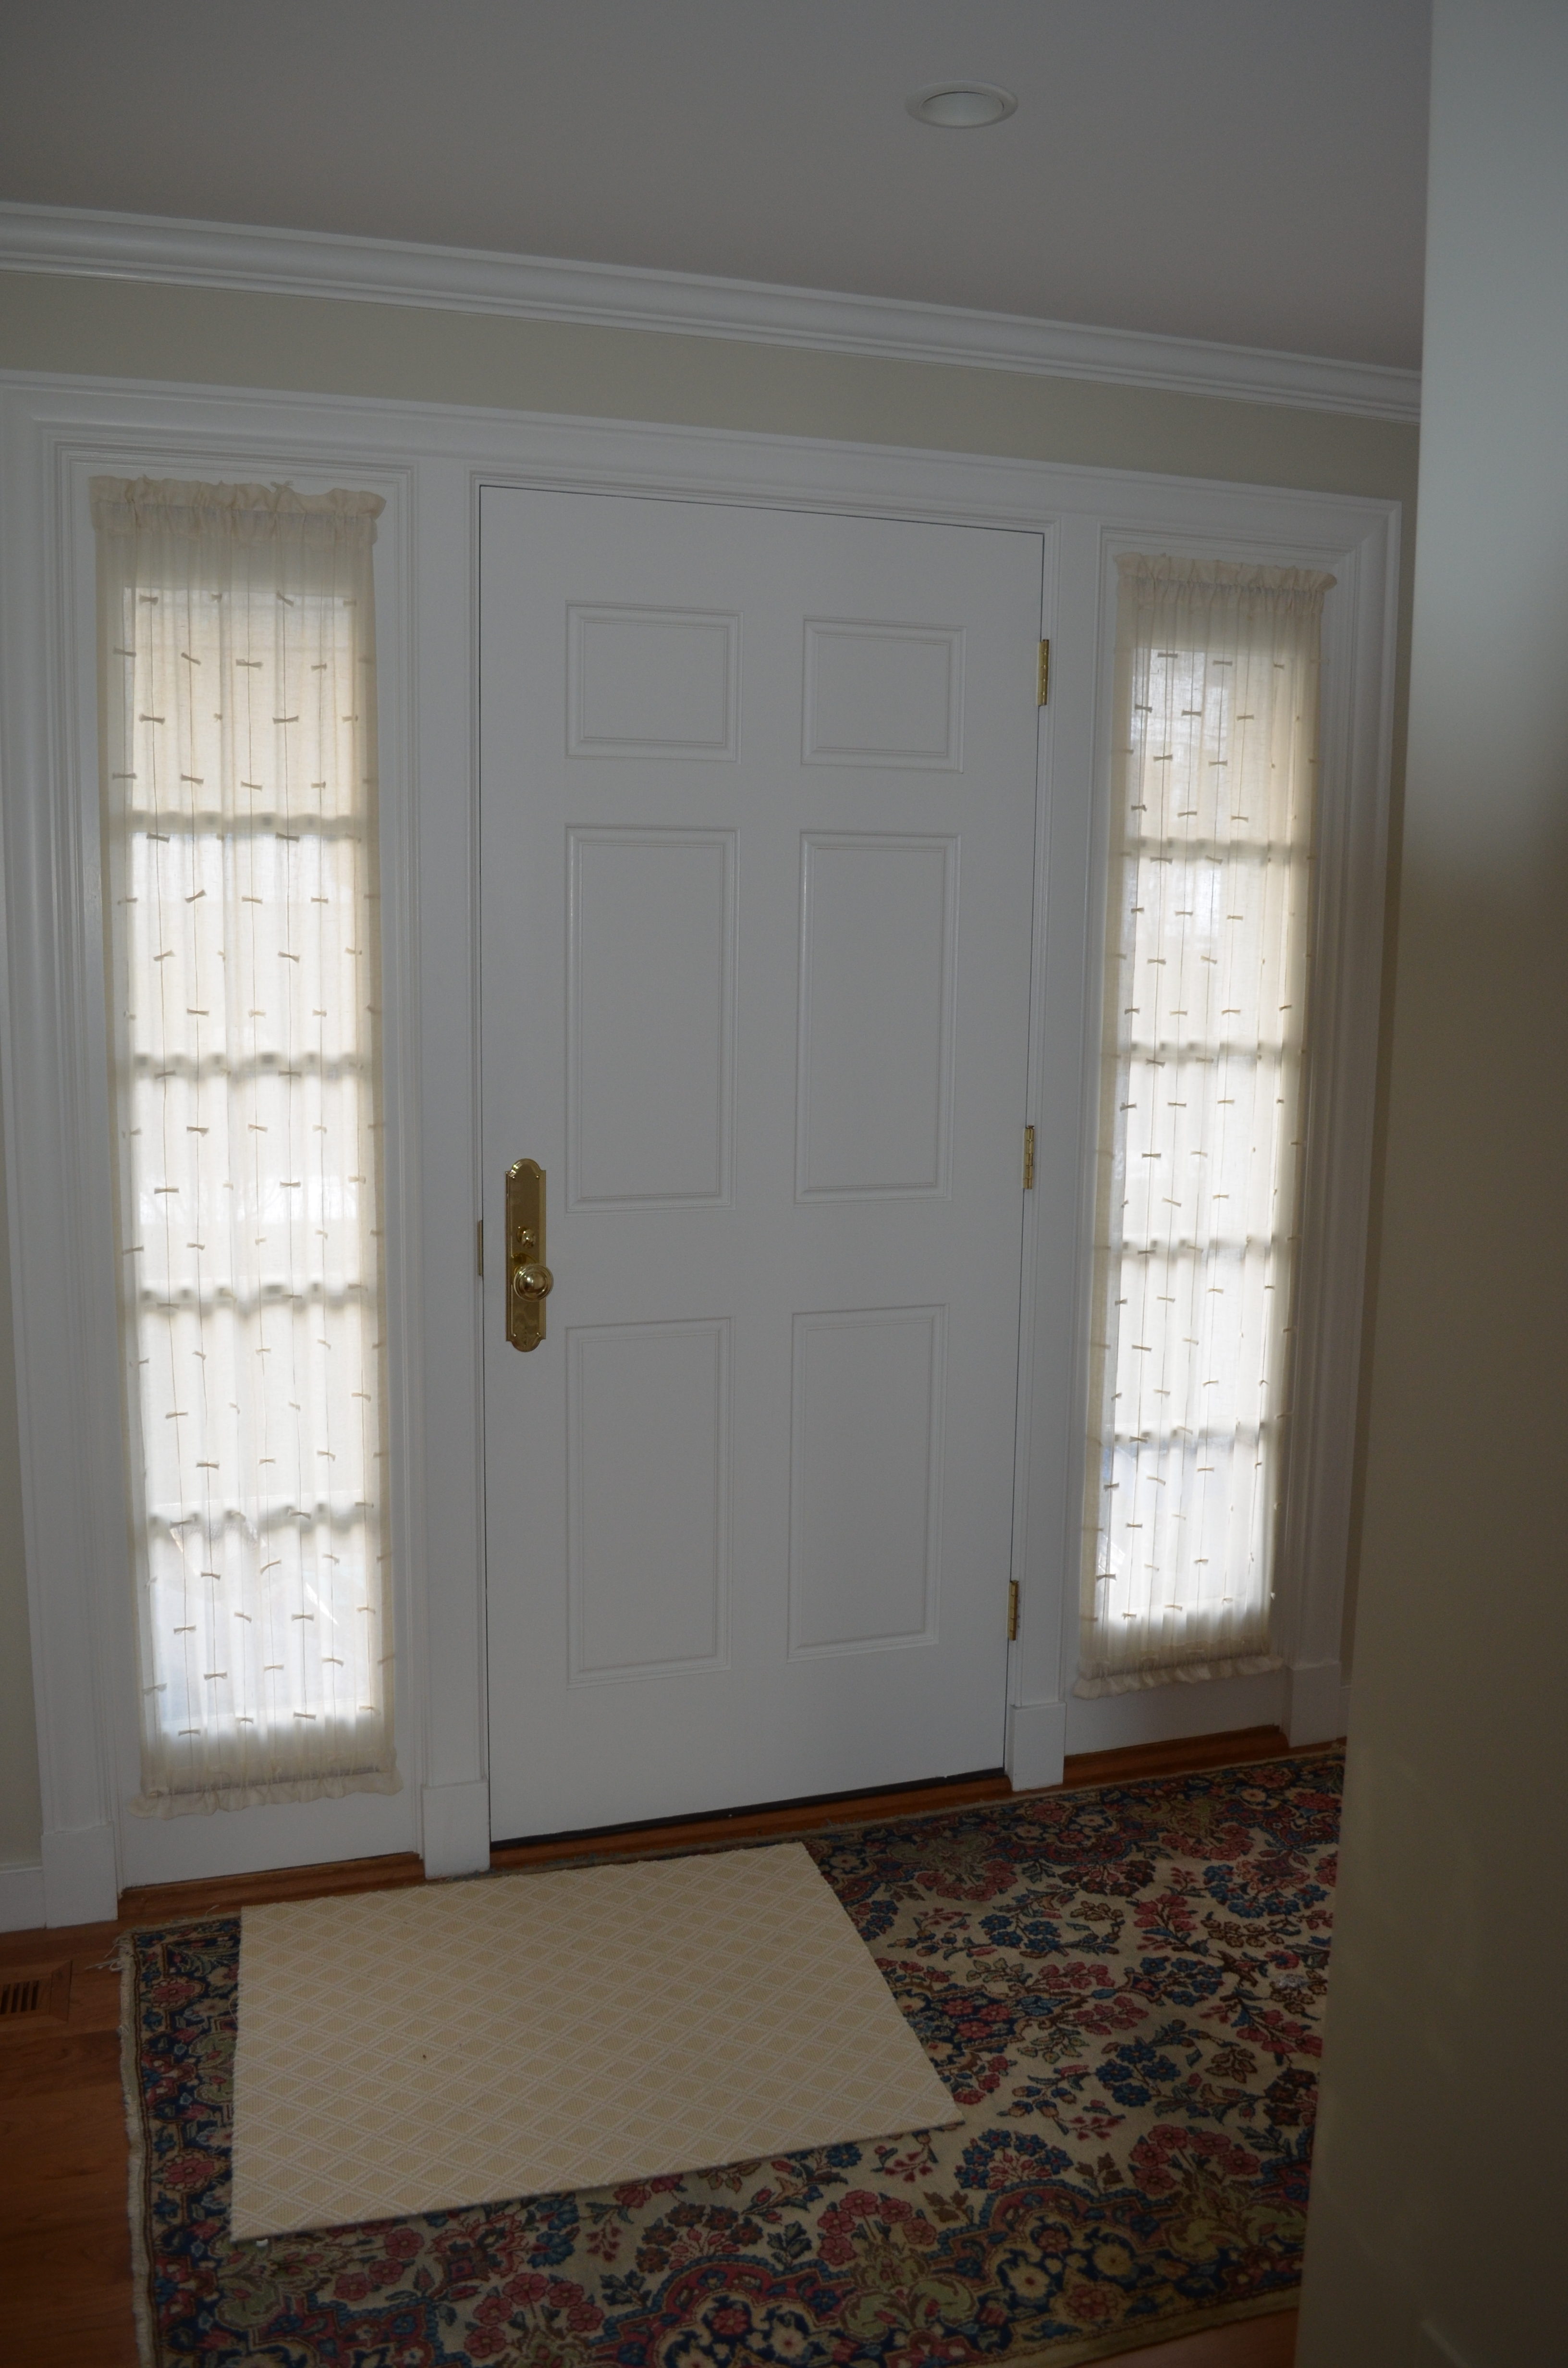 curtains for doors